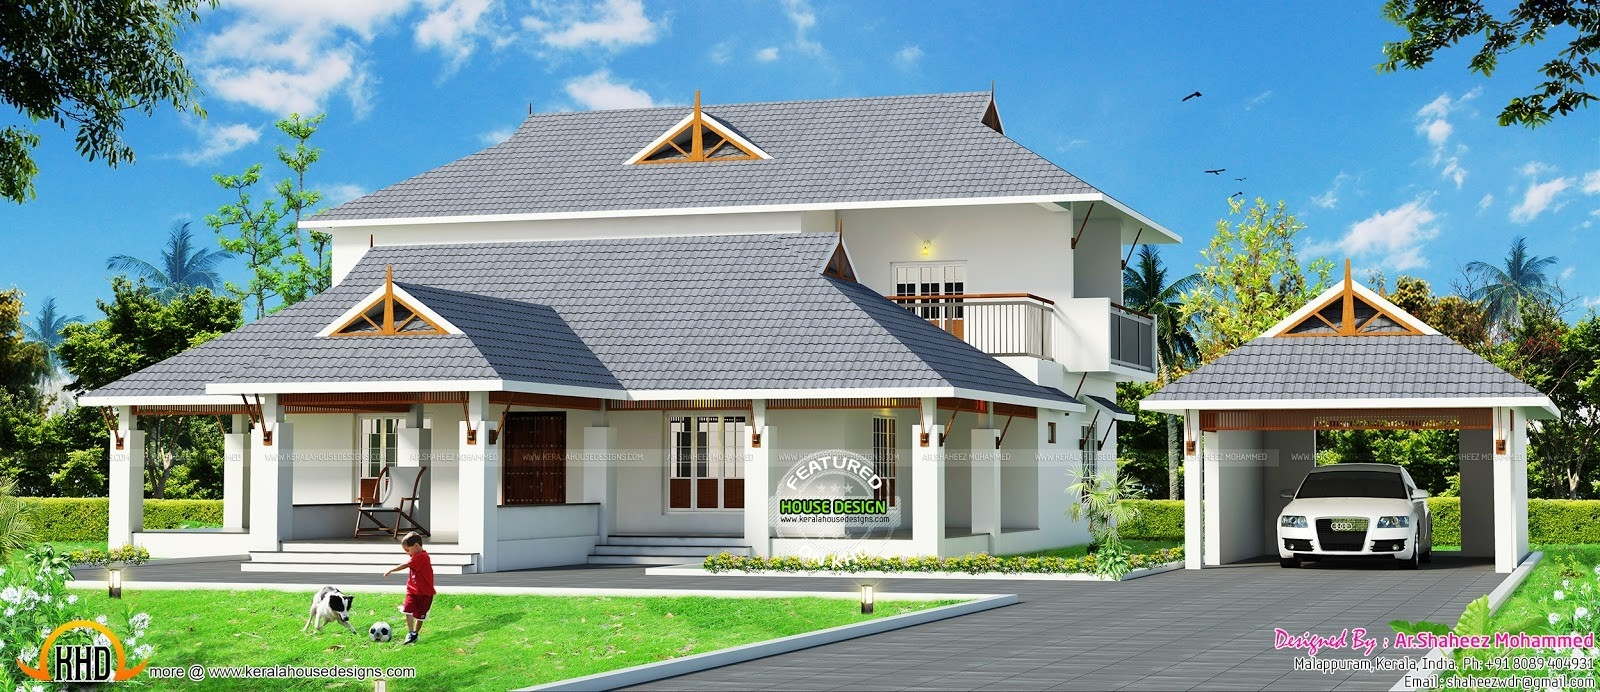 Separate Car Porch Design In Kerala Gallery Of Porch Pool Deck for proportions 1600 X 692